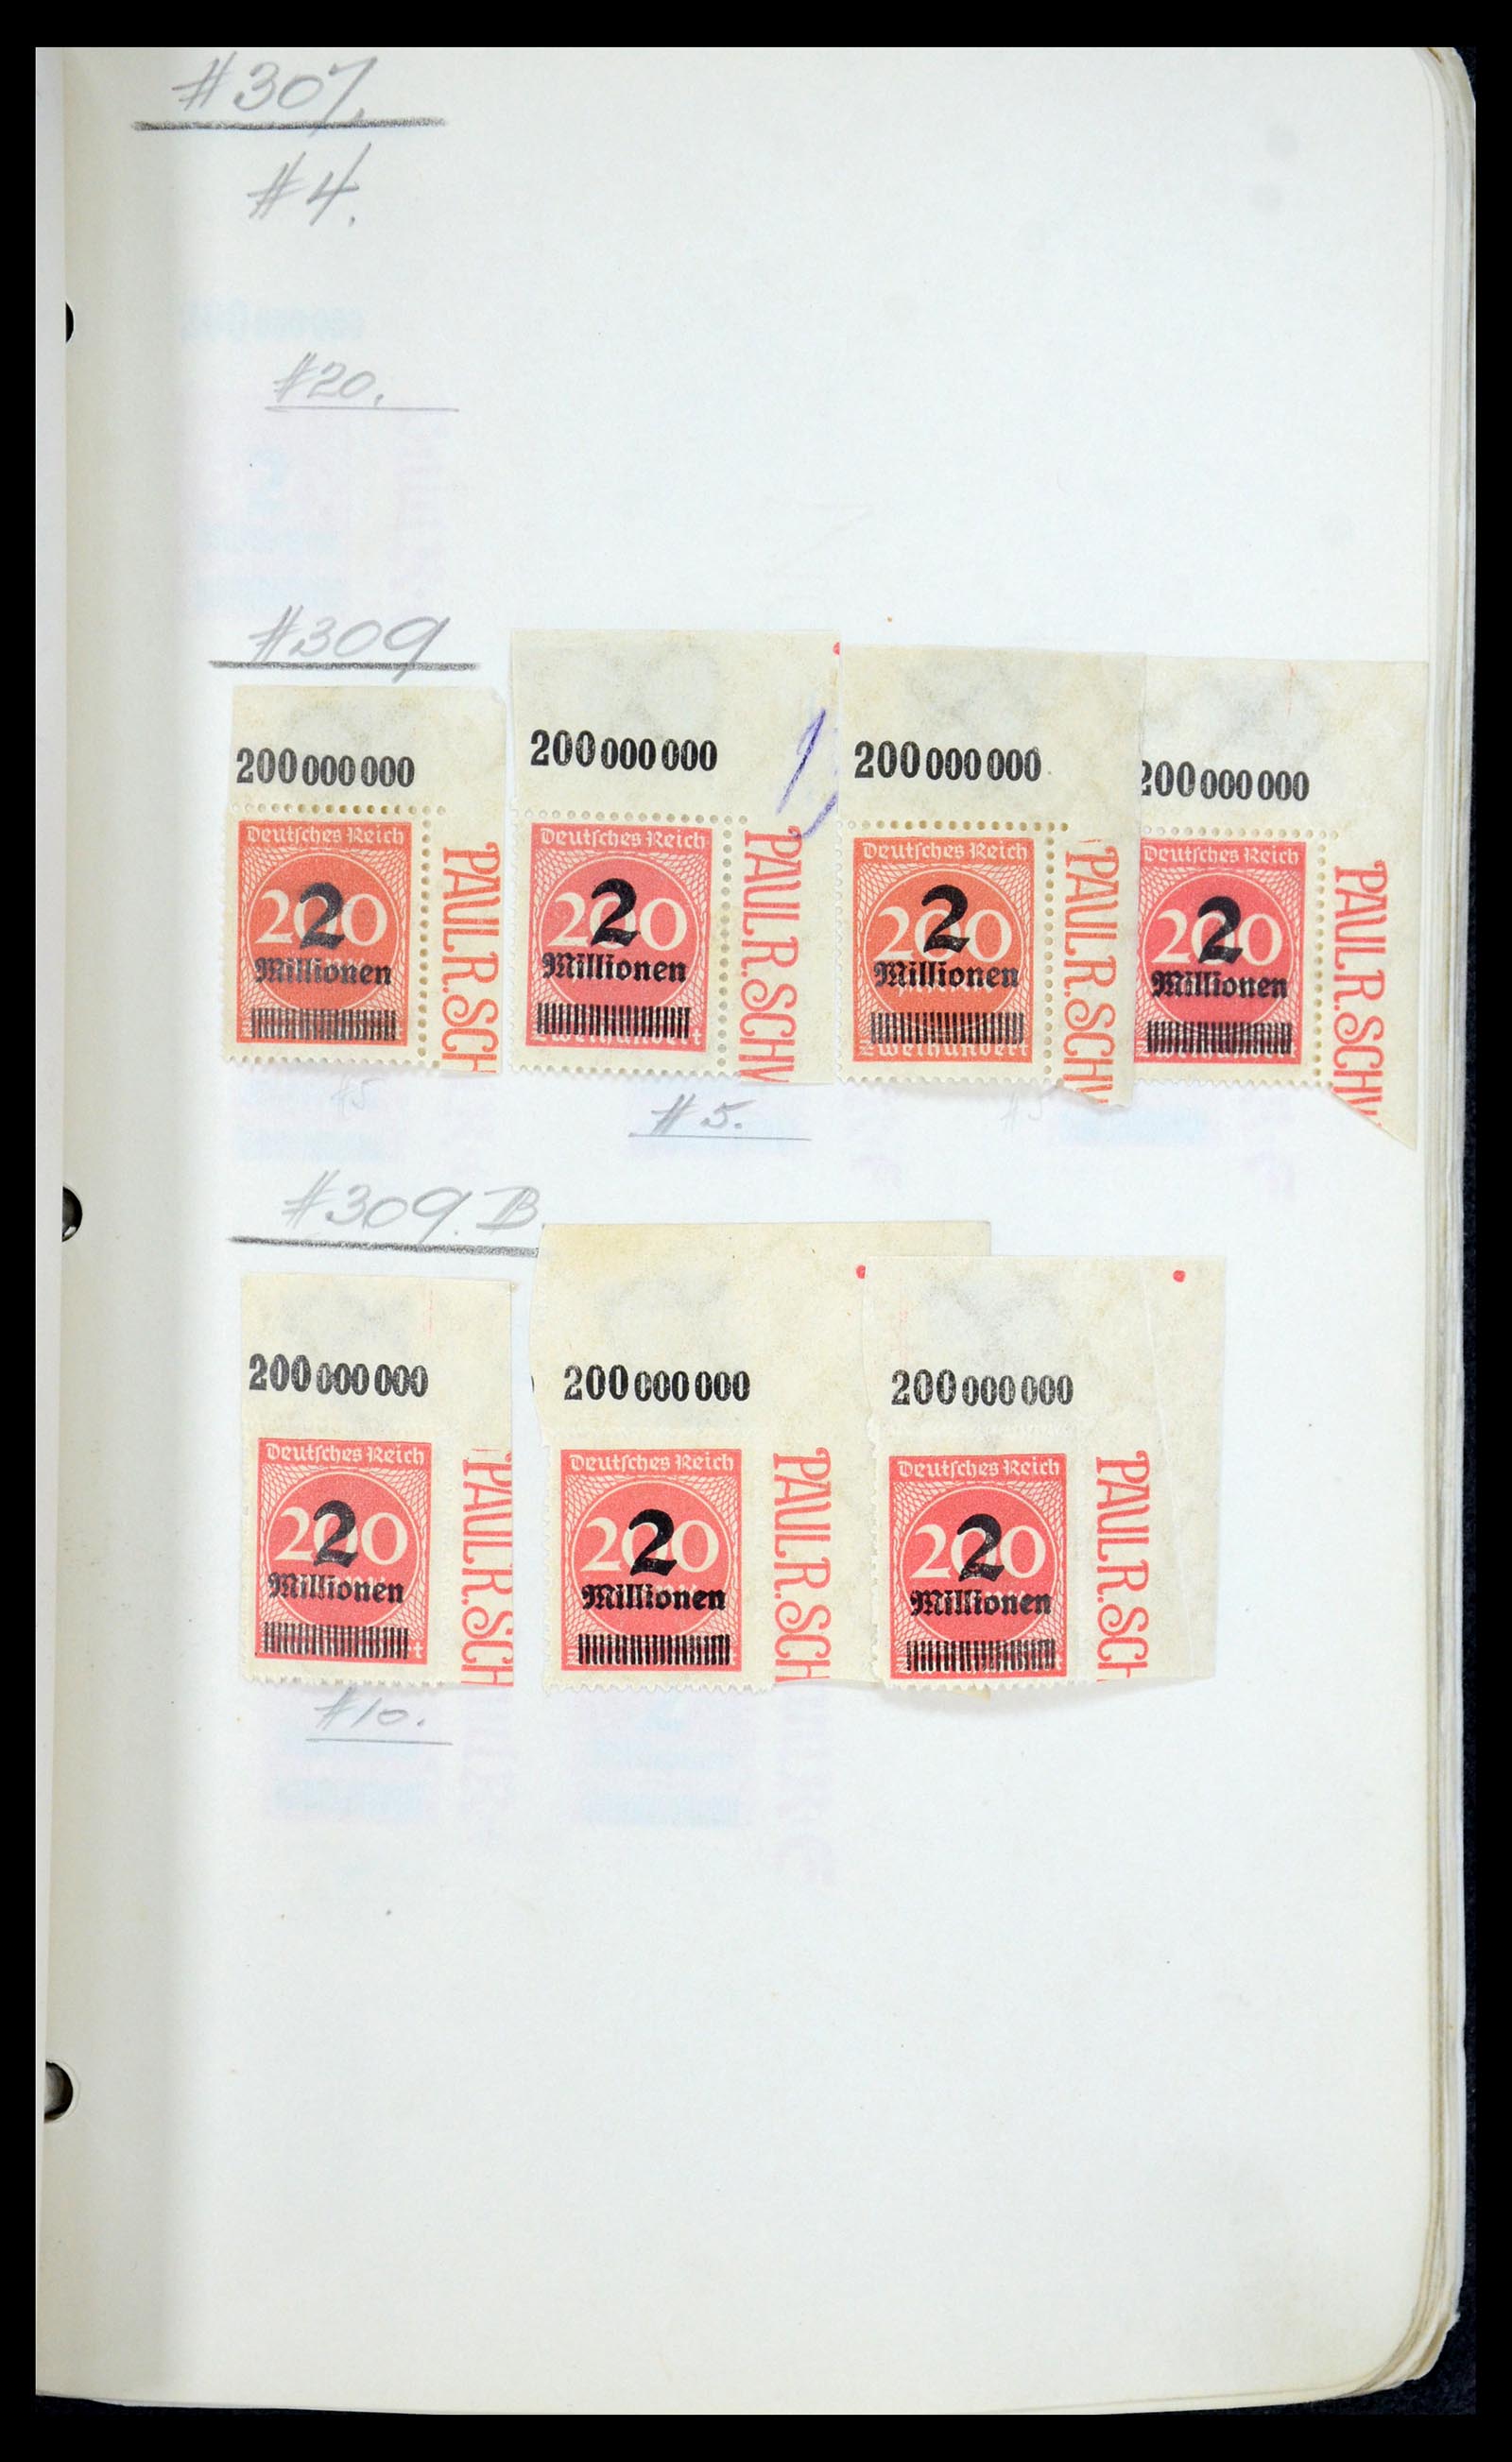 35565 023 - Stamp Collection 35565 German Reich infla 1919-1923.